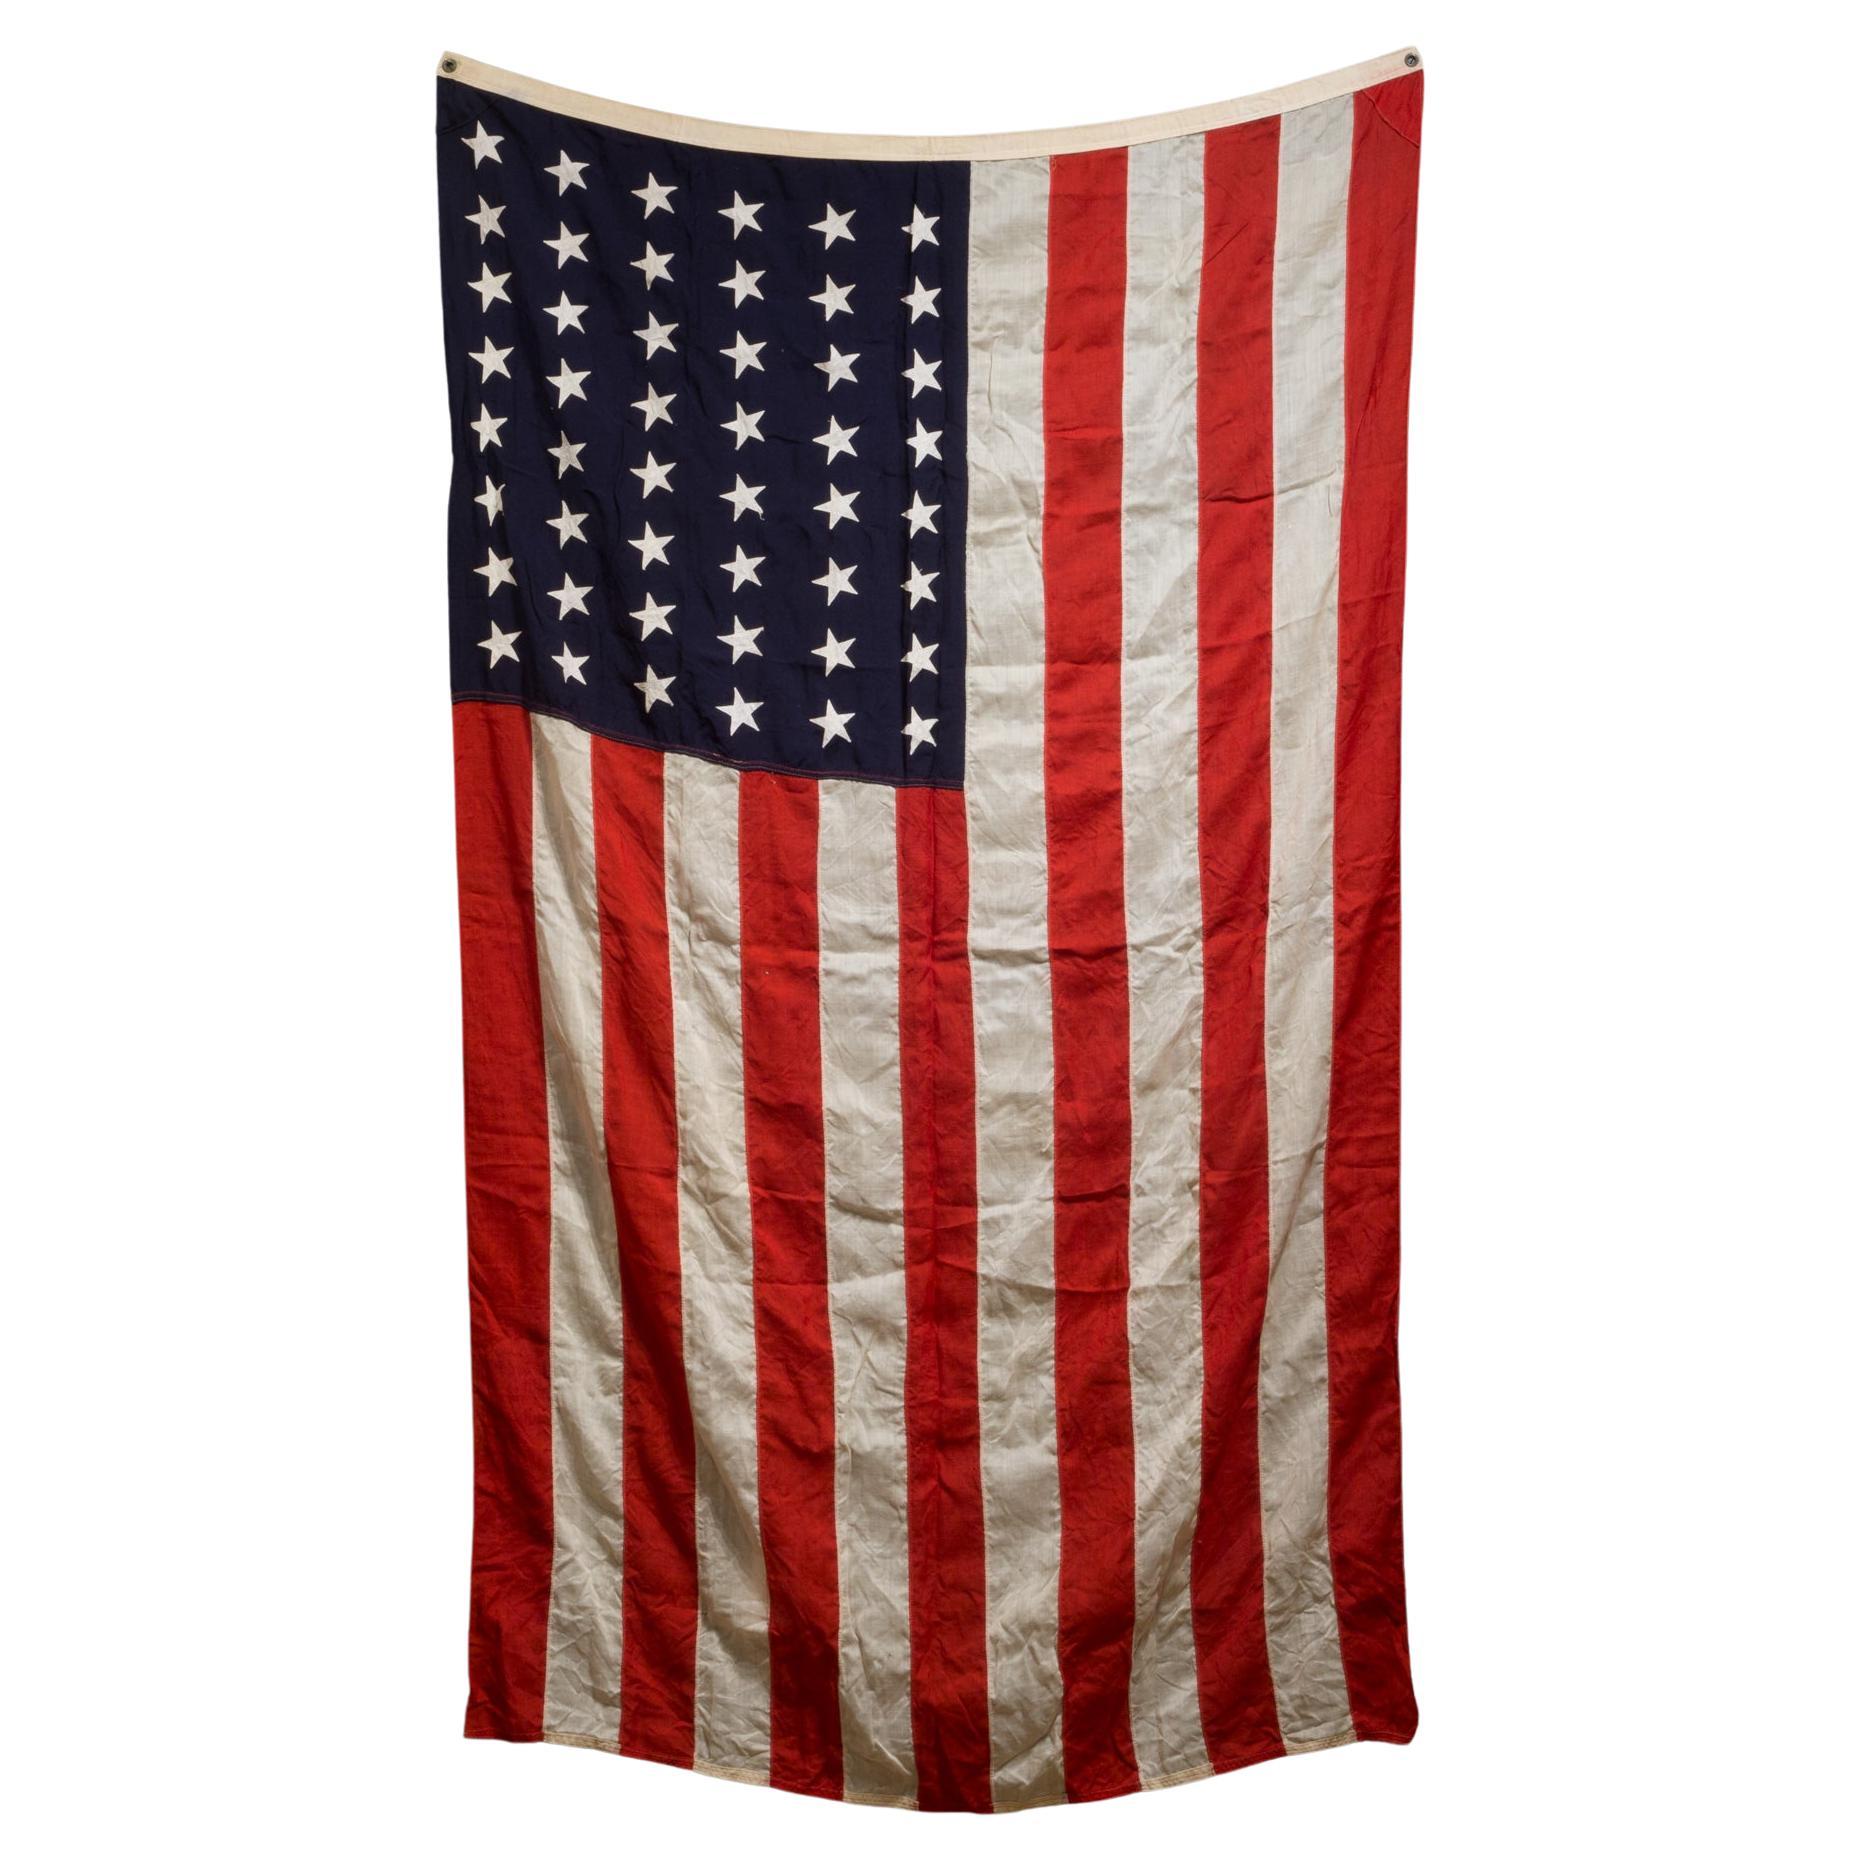 Early 20th c. Monumental Wool American Flag with 48 Stars, c.1940-1950